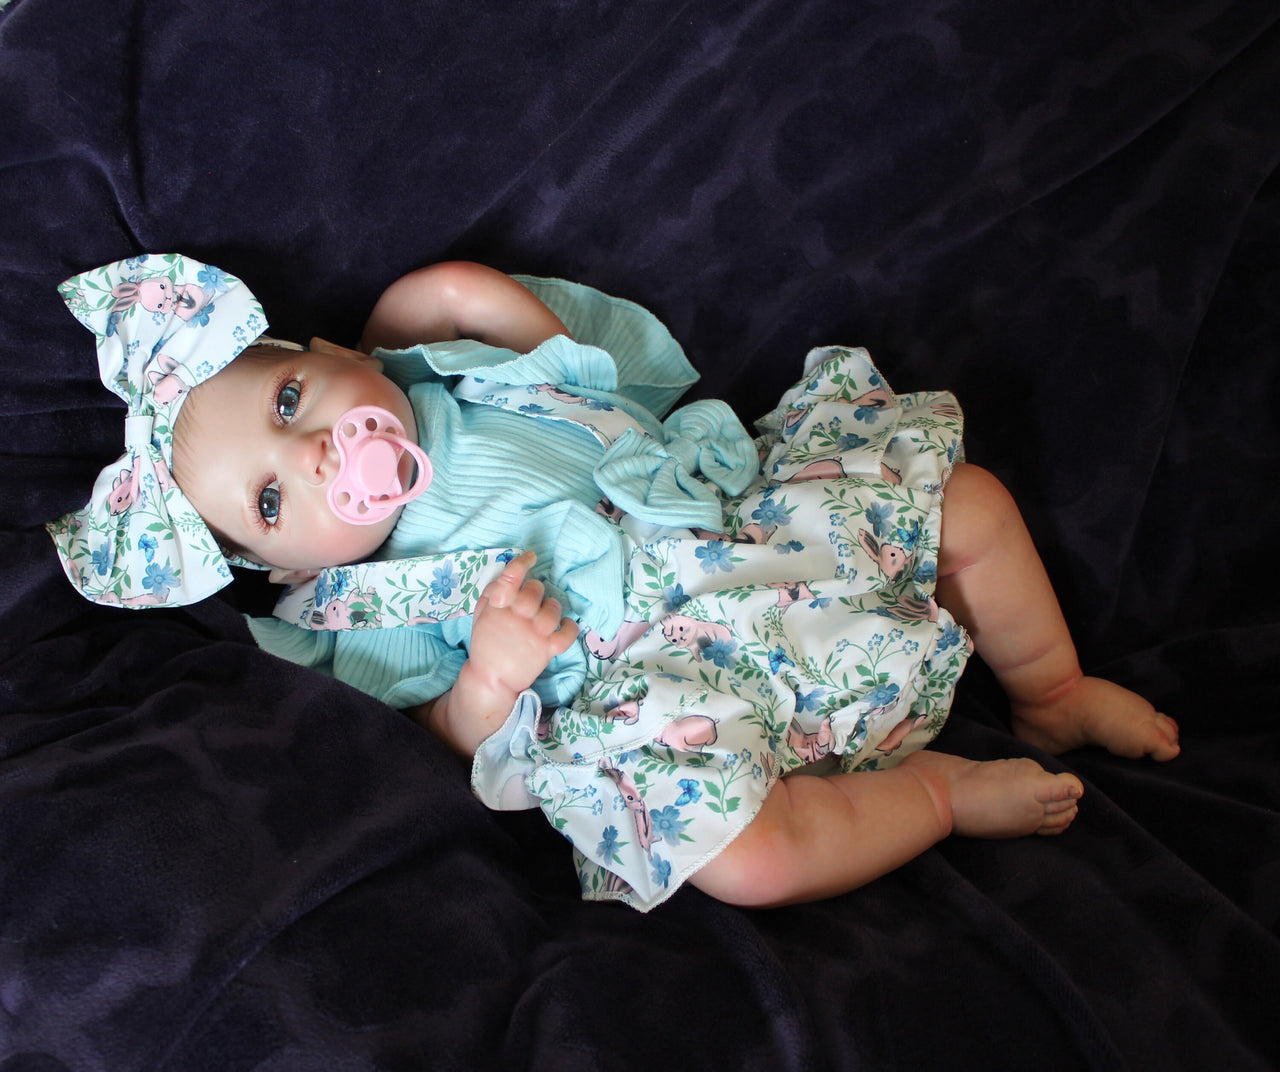 Lifelike Reborn Baby Doll 20” 2 to 6 Pounds Weighted Newborn Baby Girl/Boy Soft Heavy Baby Dolls For Children Child Friendly Gifts For Girls